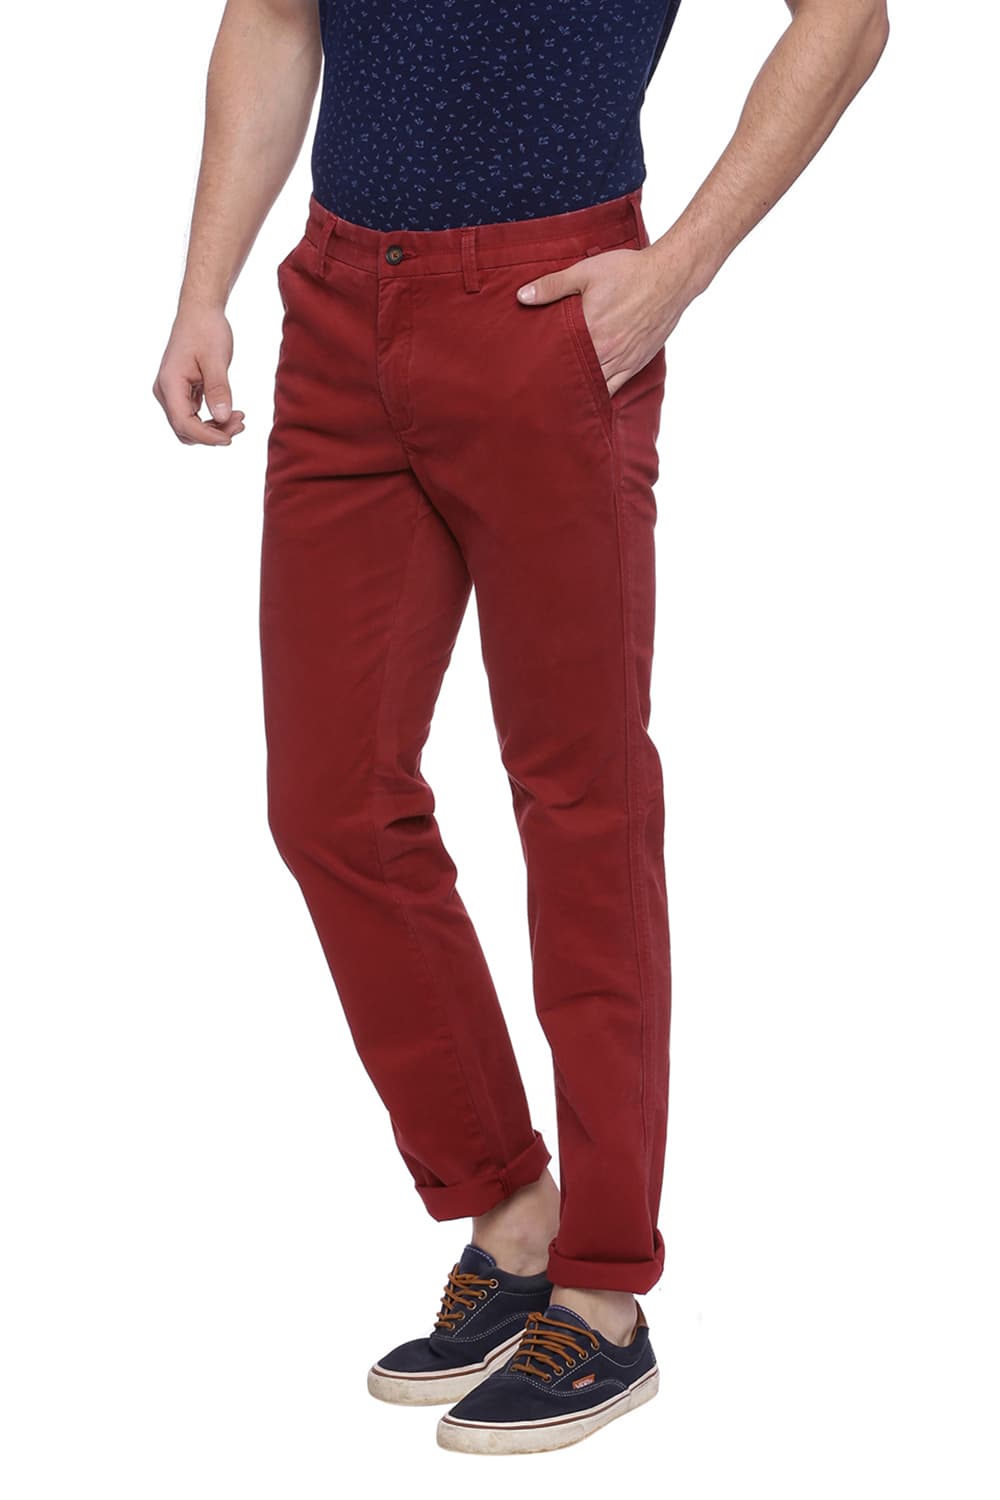 BASICS TAPERED FIT TWILL STRETCH TROUSER